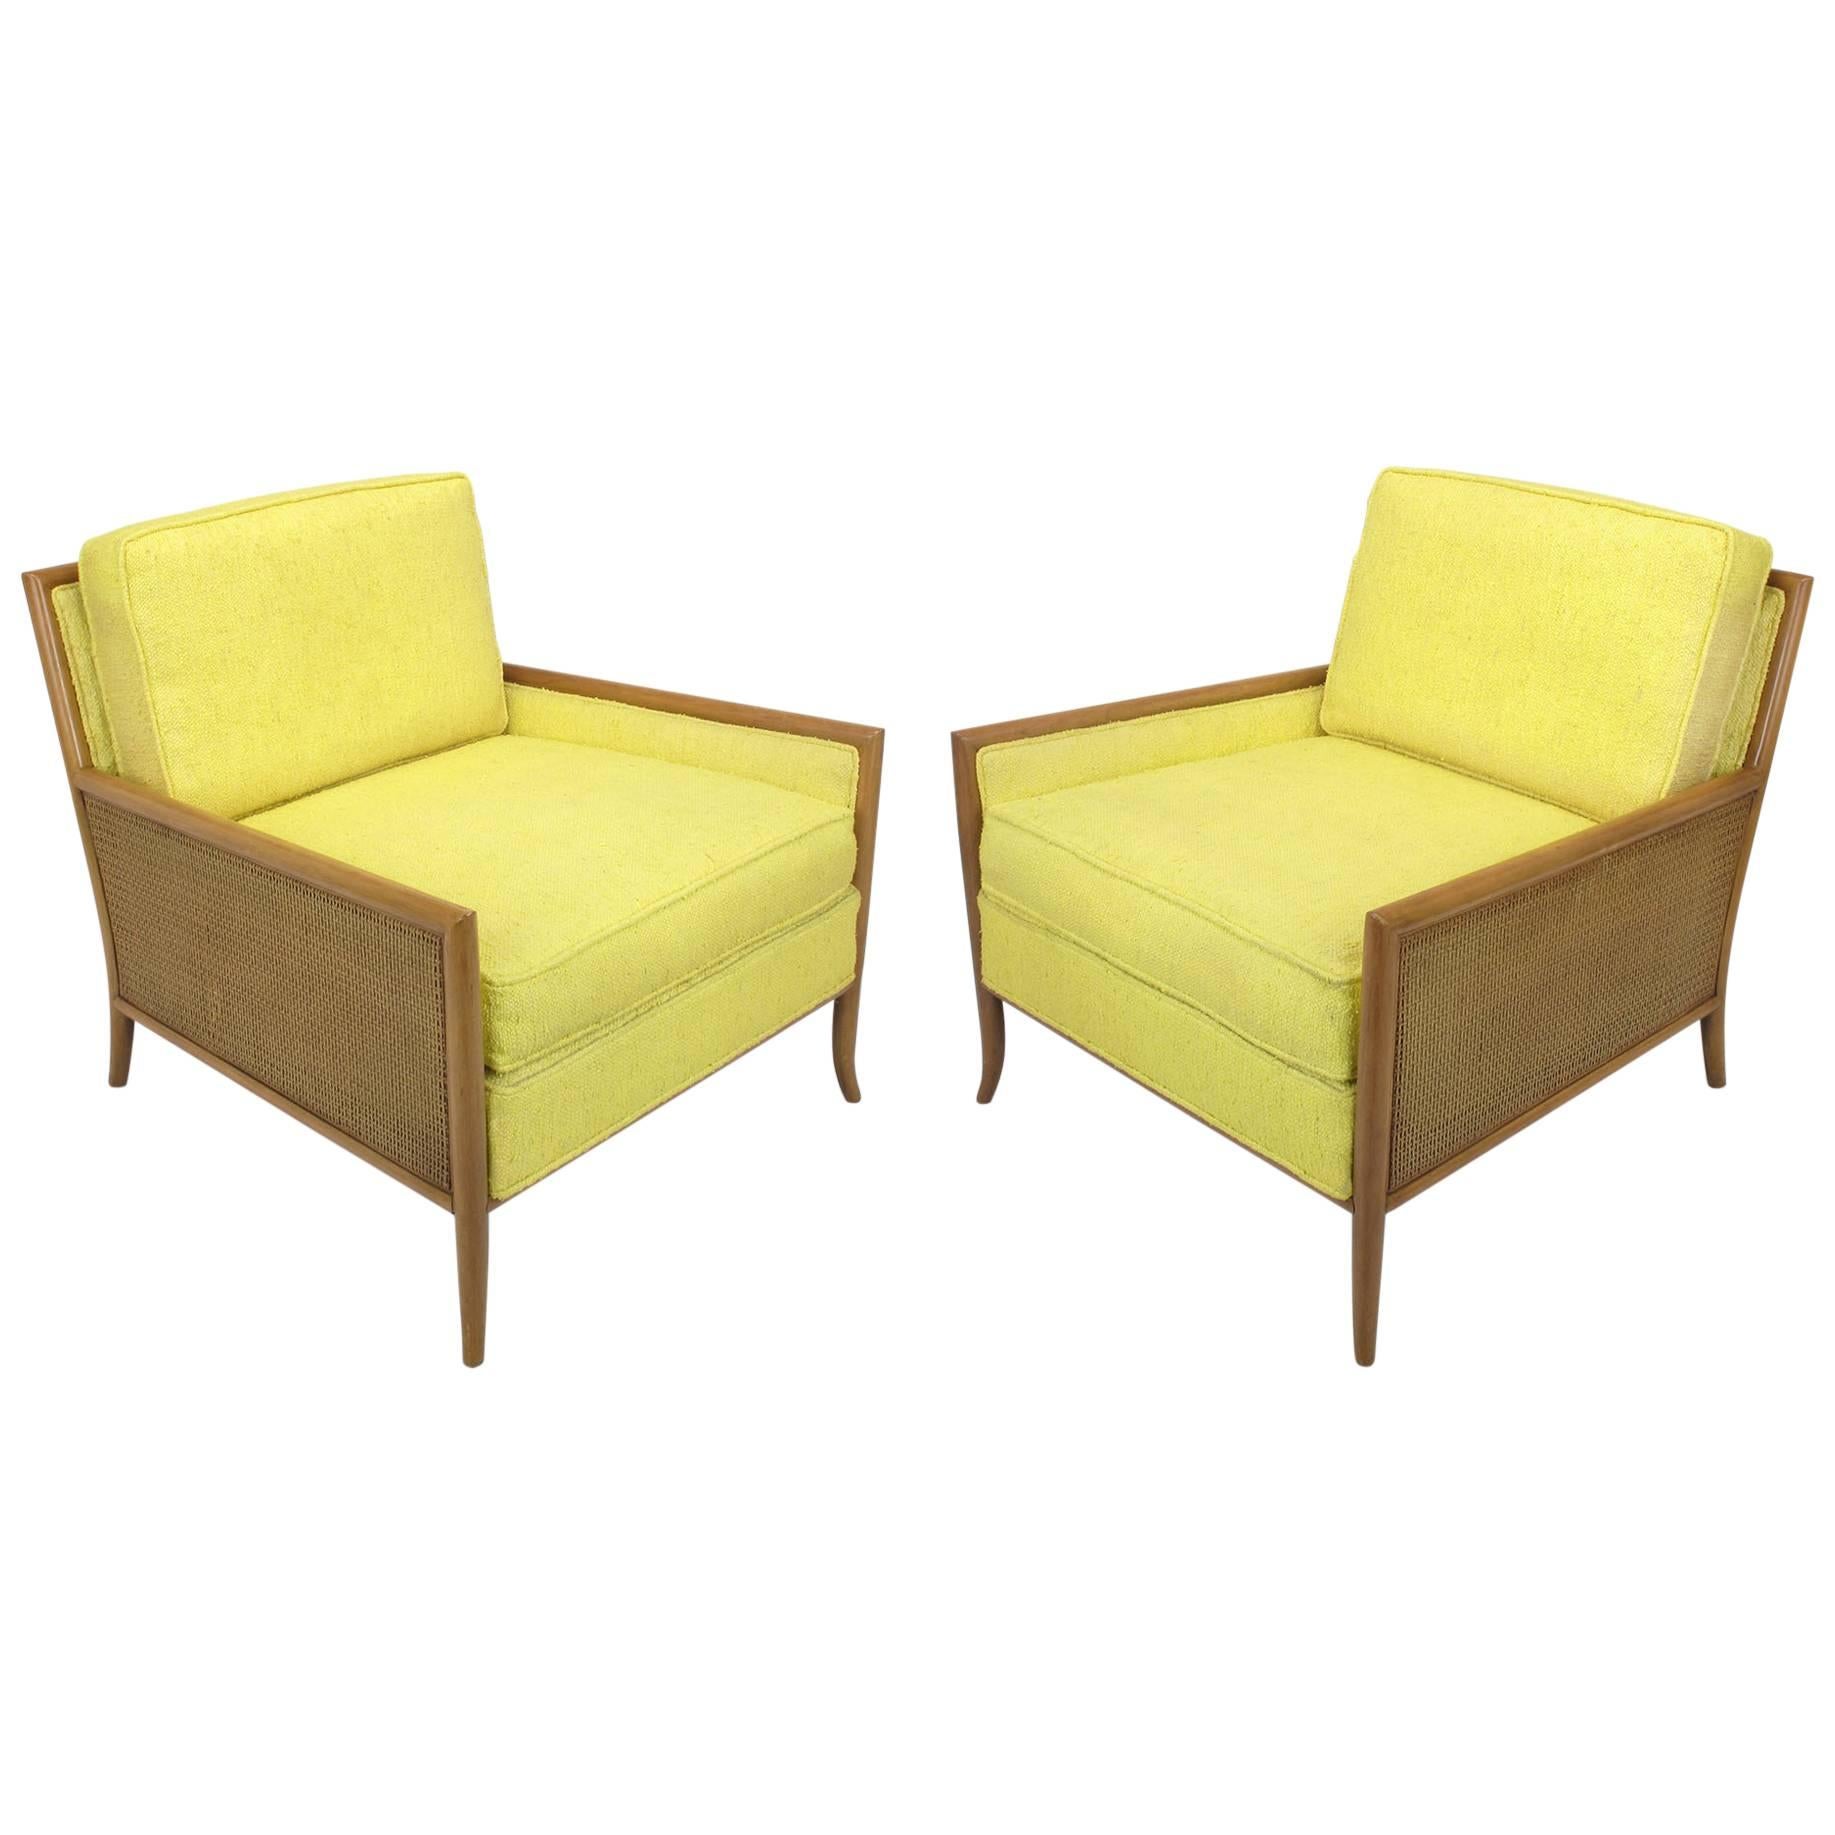 Pair of Walnut & Yellow Haitian Cotton Lounge Chairs after TH. Robsjohn-Gibbings